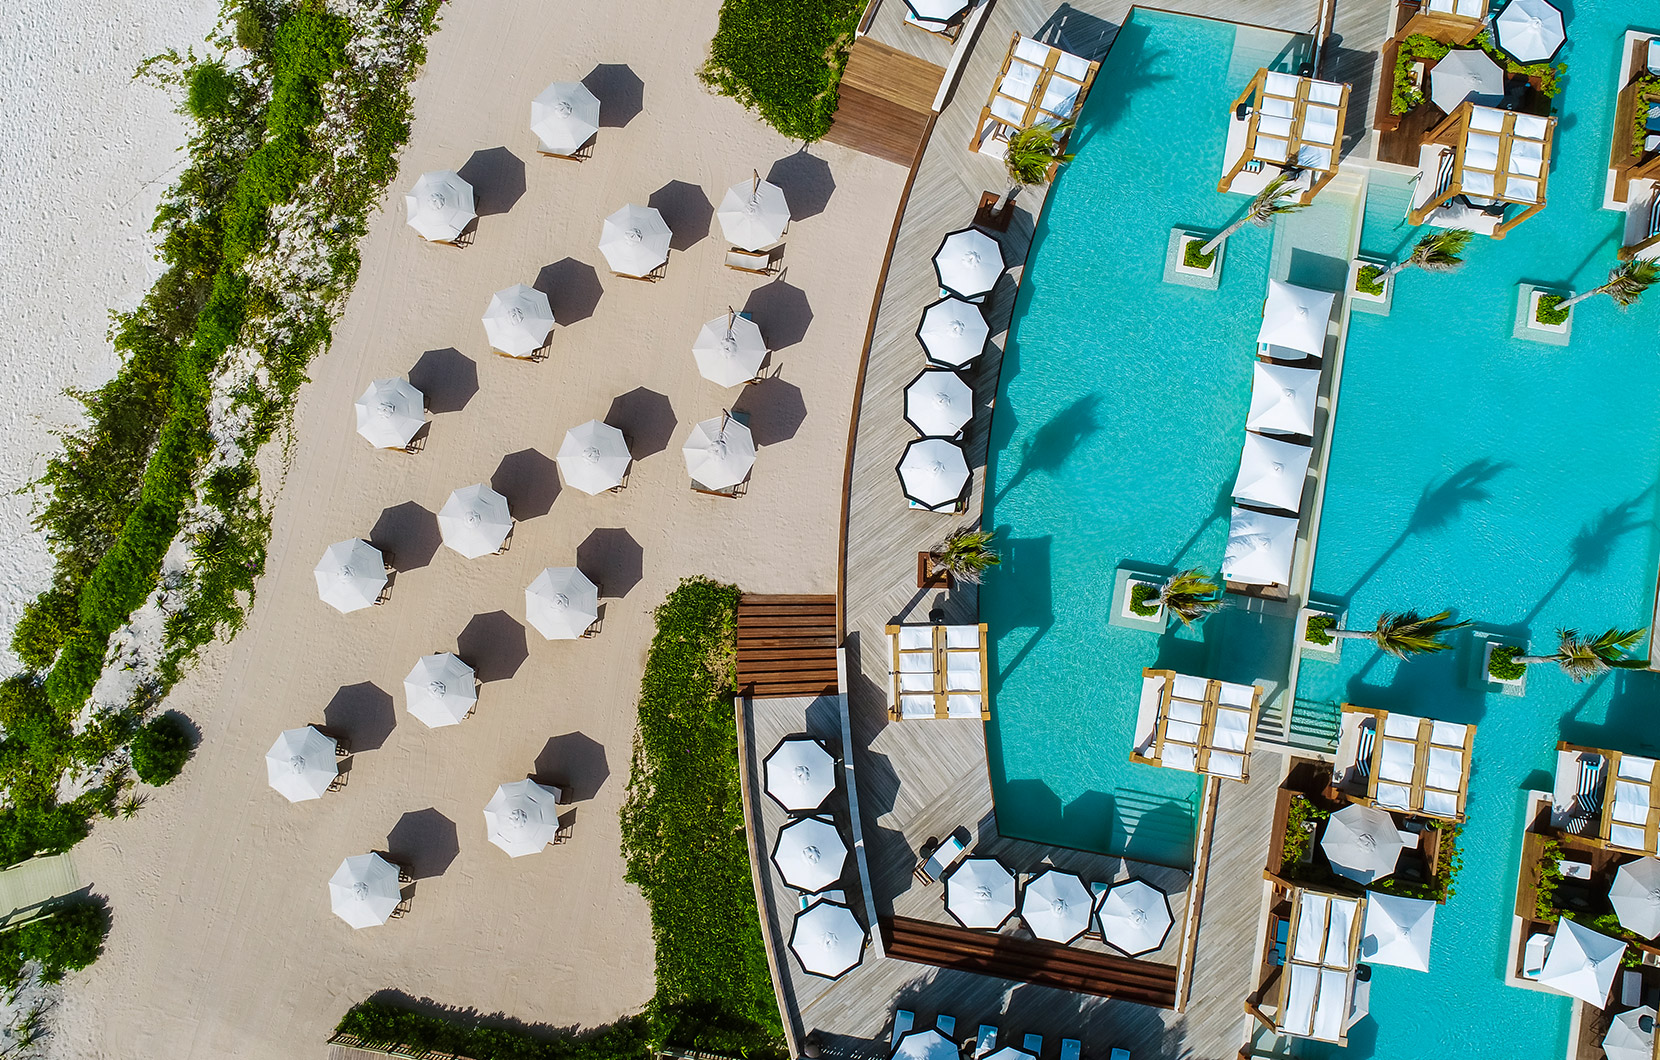 An aerial shot of The Beach Club displays its striking design from above.